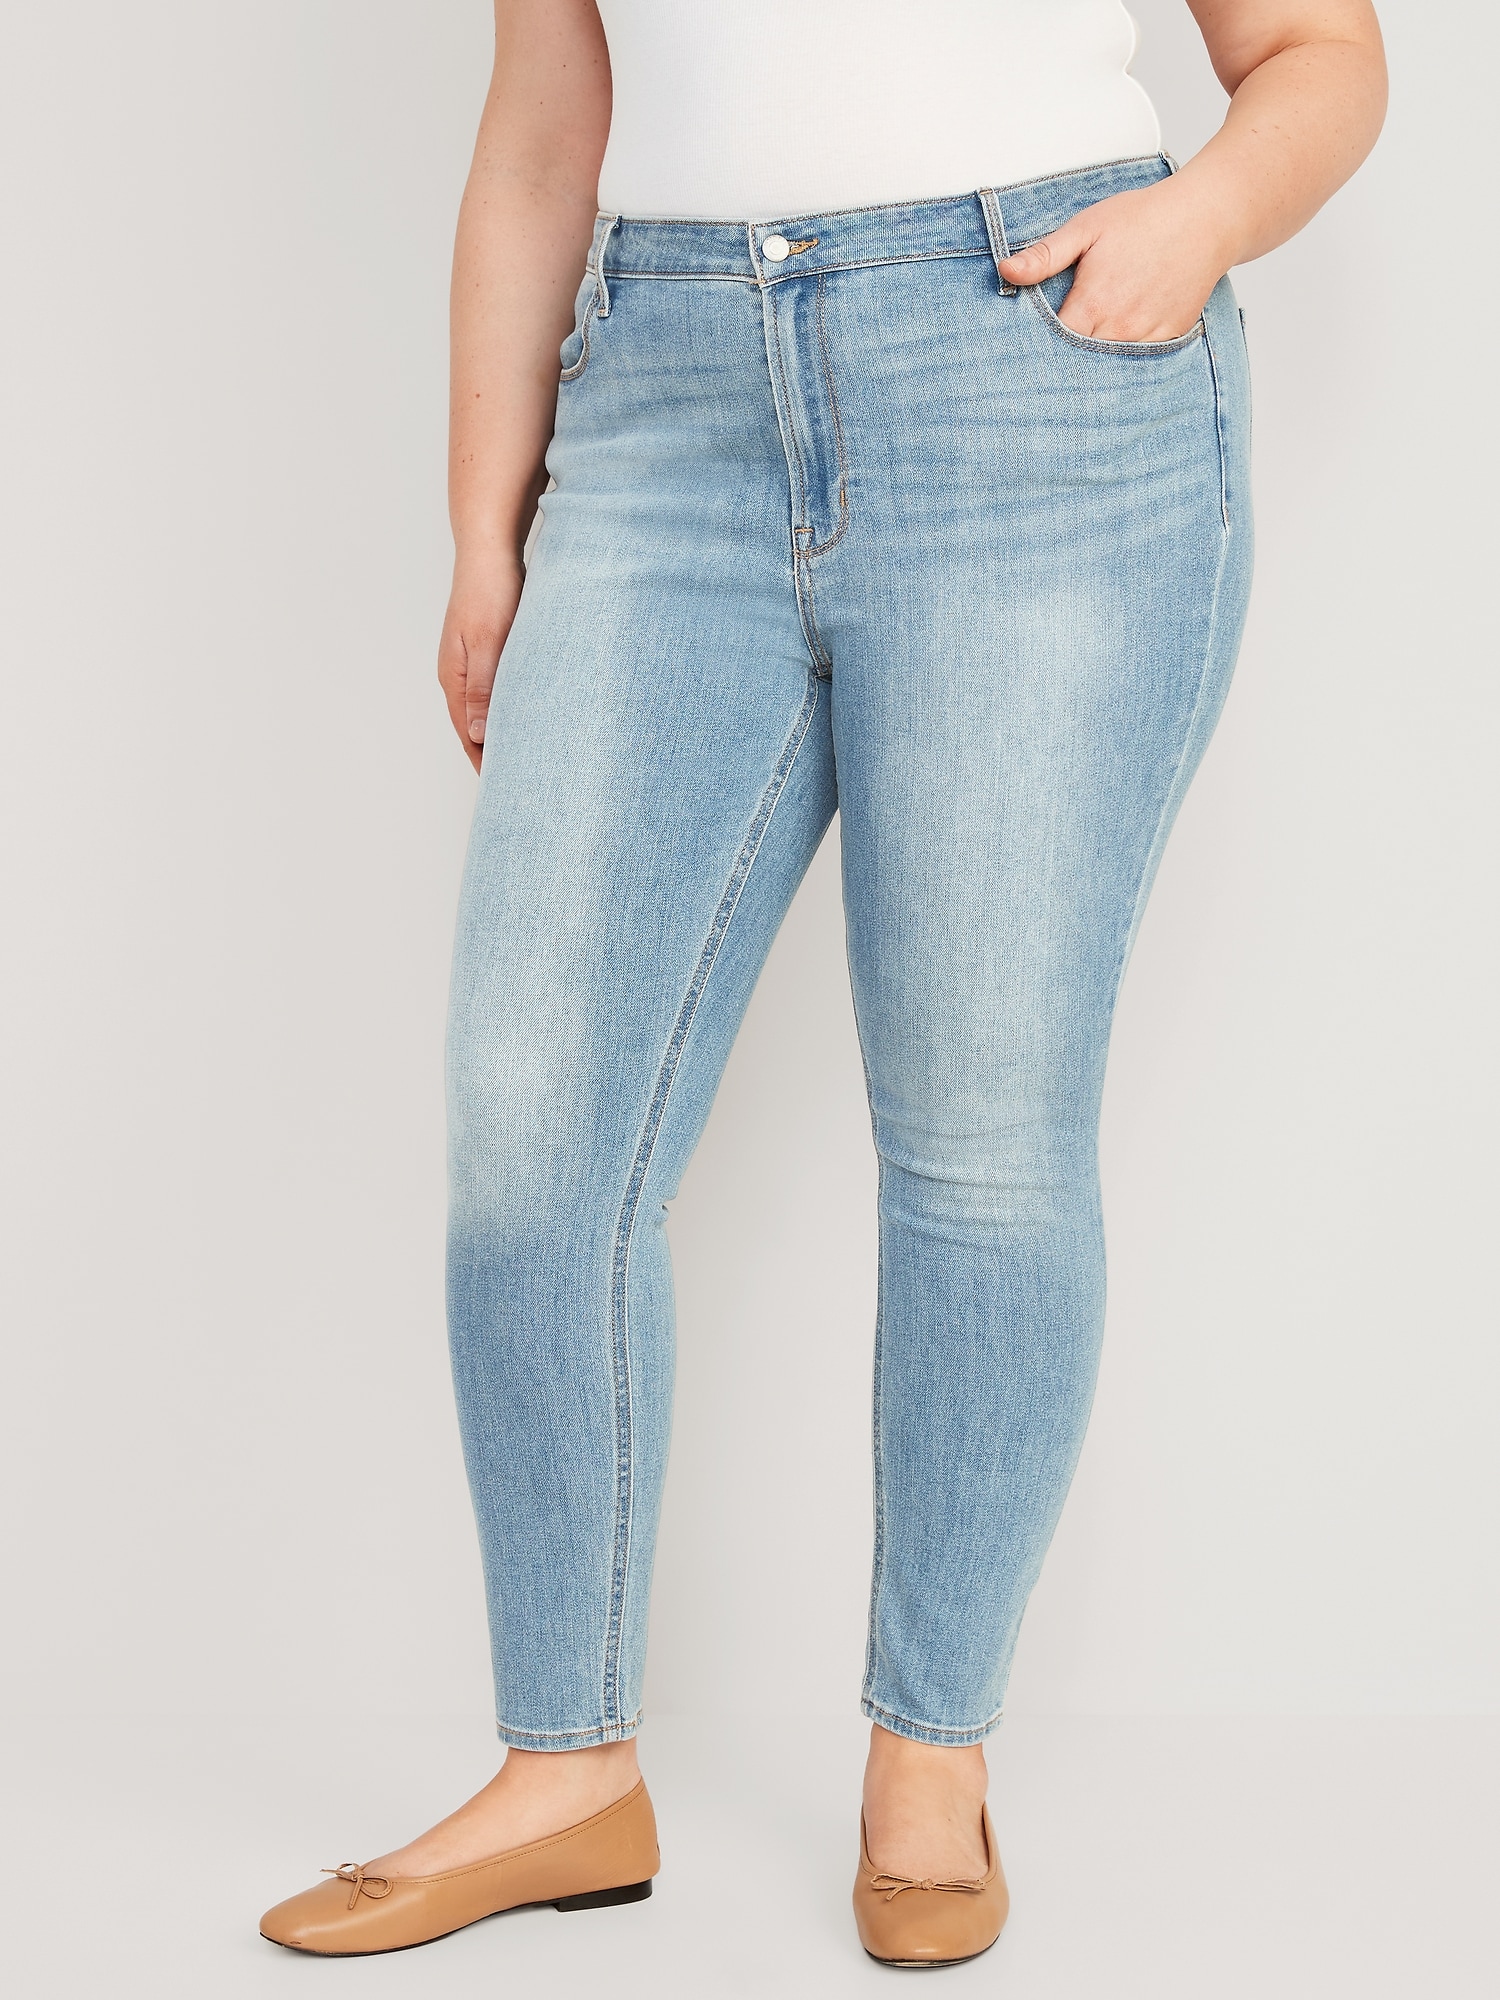 Diez años Novedad Volverse High-Waisted Wow Super-Skinny Jeans for Women | Old Navy